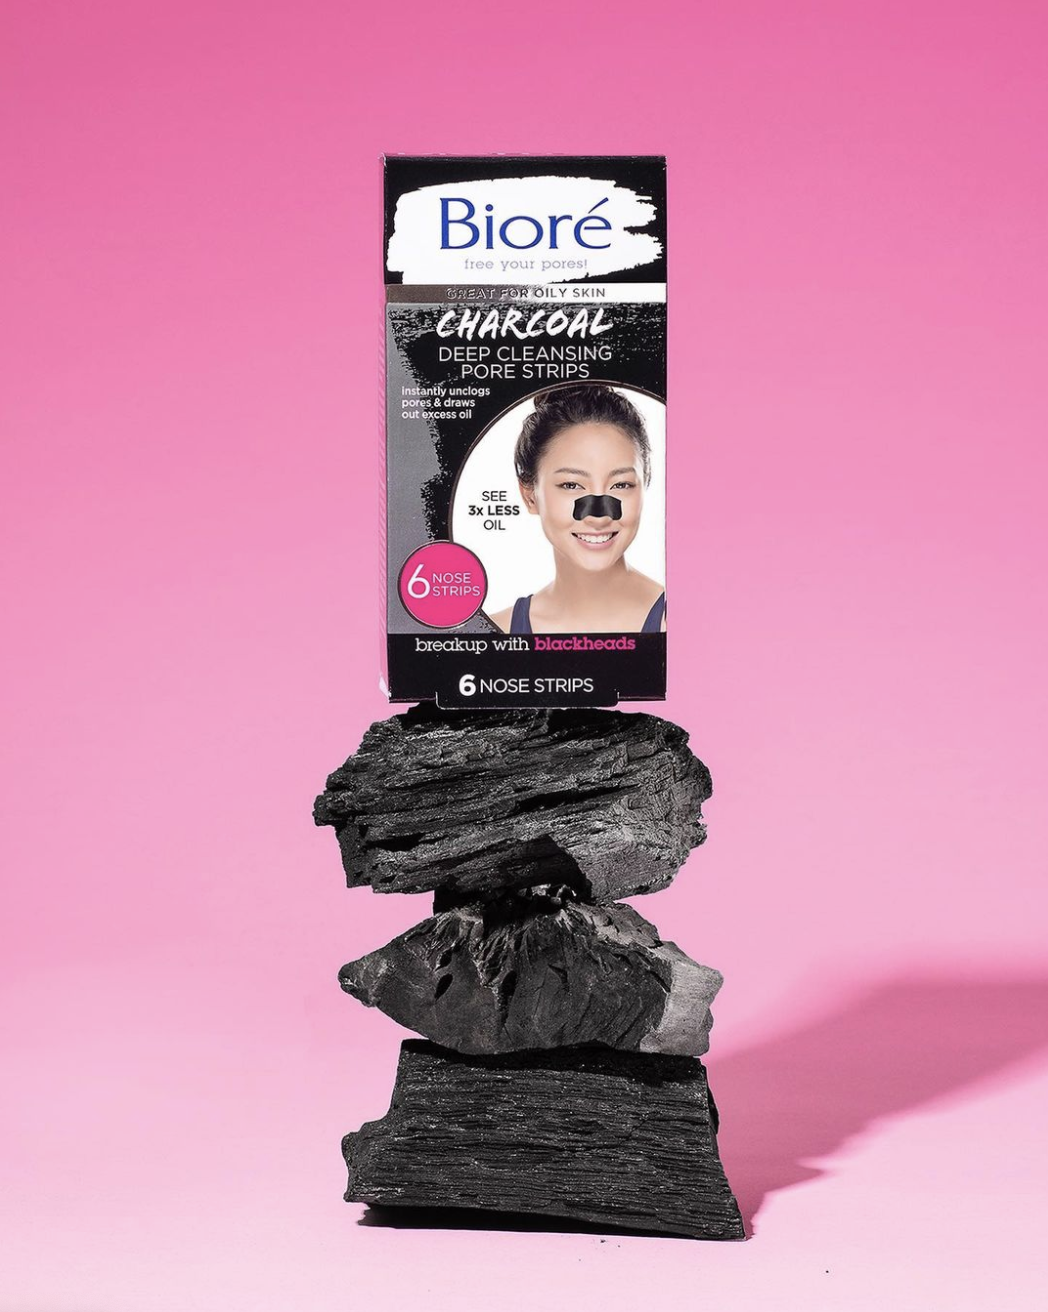 A pack of deep cleansing charcoal pore strips on a stack of charcoal